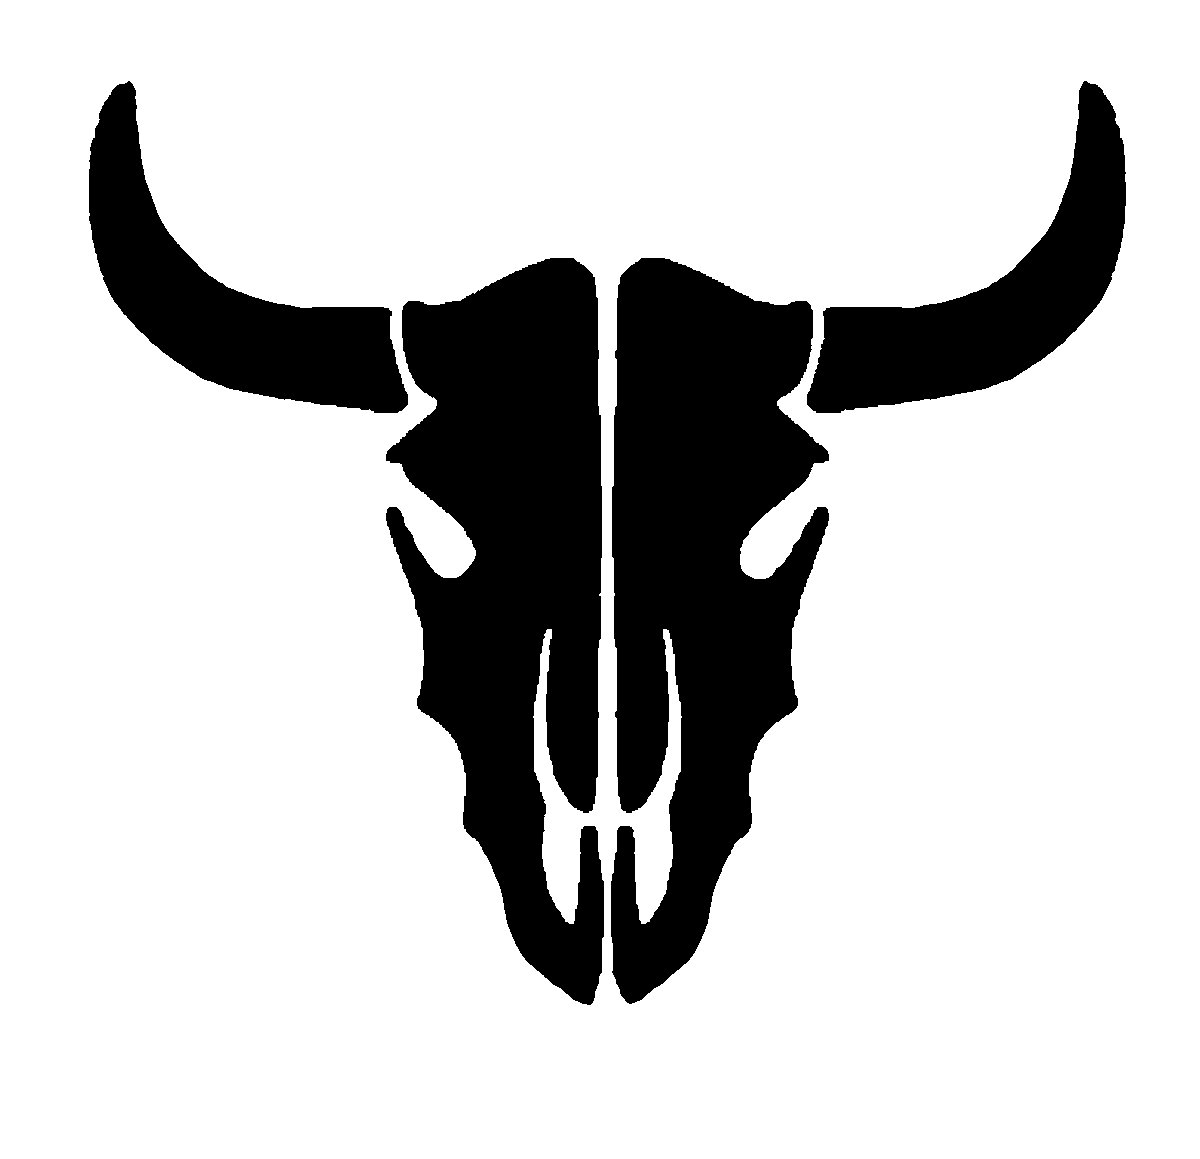 Drawn Cow Texas Longhorn - Easy Bull Skull Drawing PNG Image | Transparent  PNG Free Download on SeekPNG